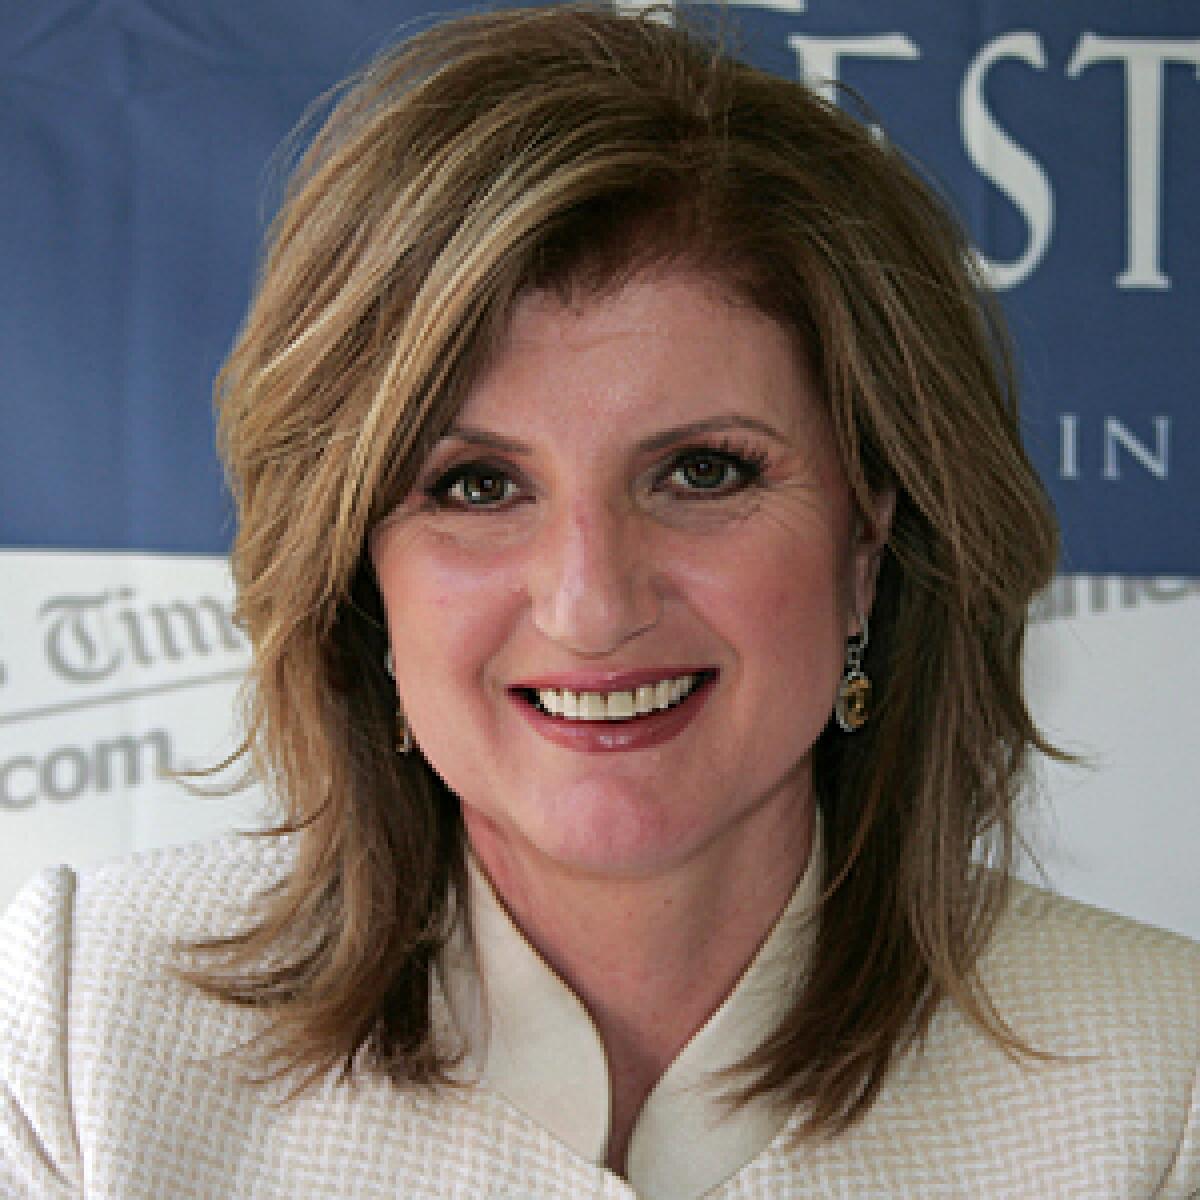 POST: Arianna Huffington at The Times book festival.